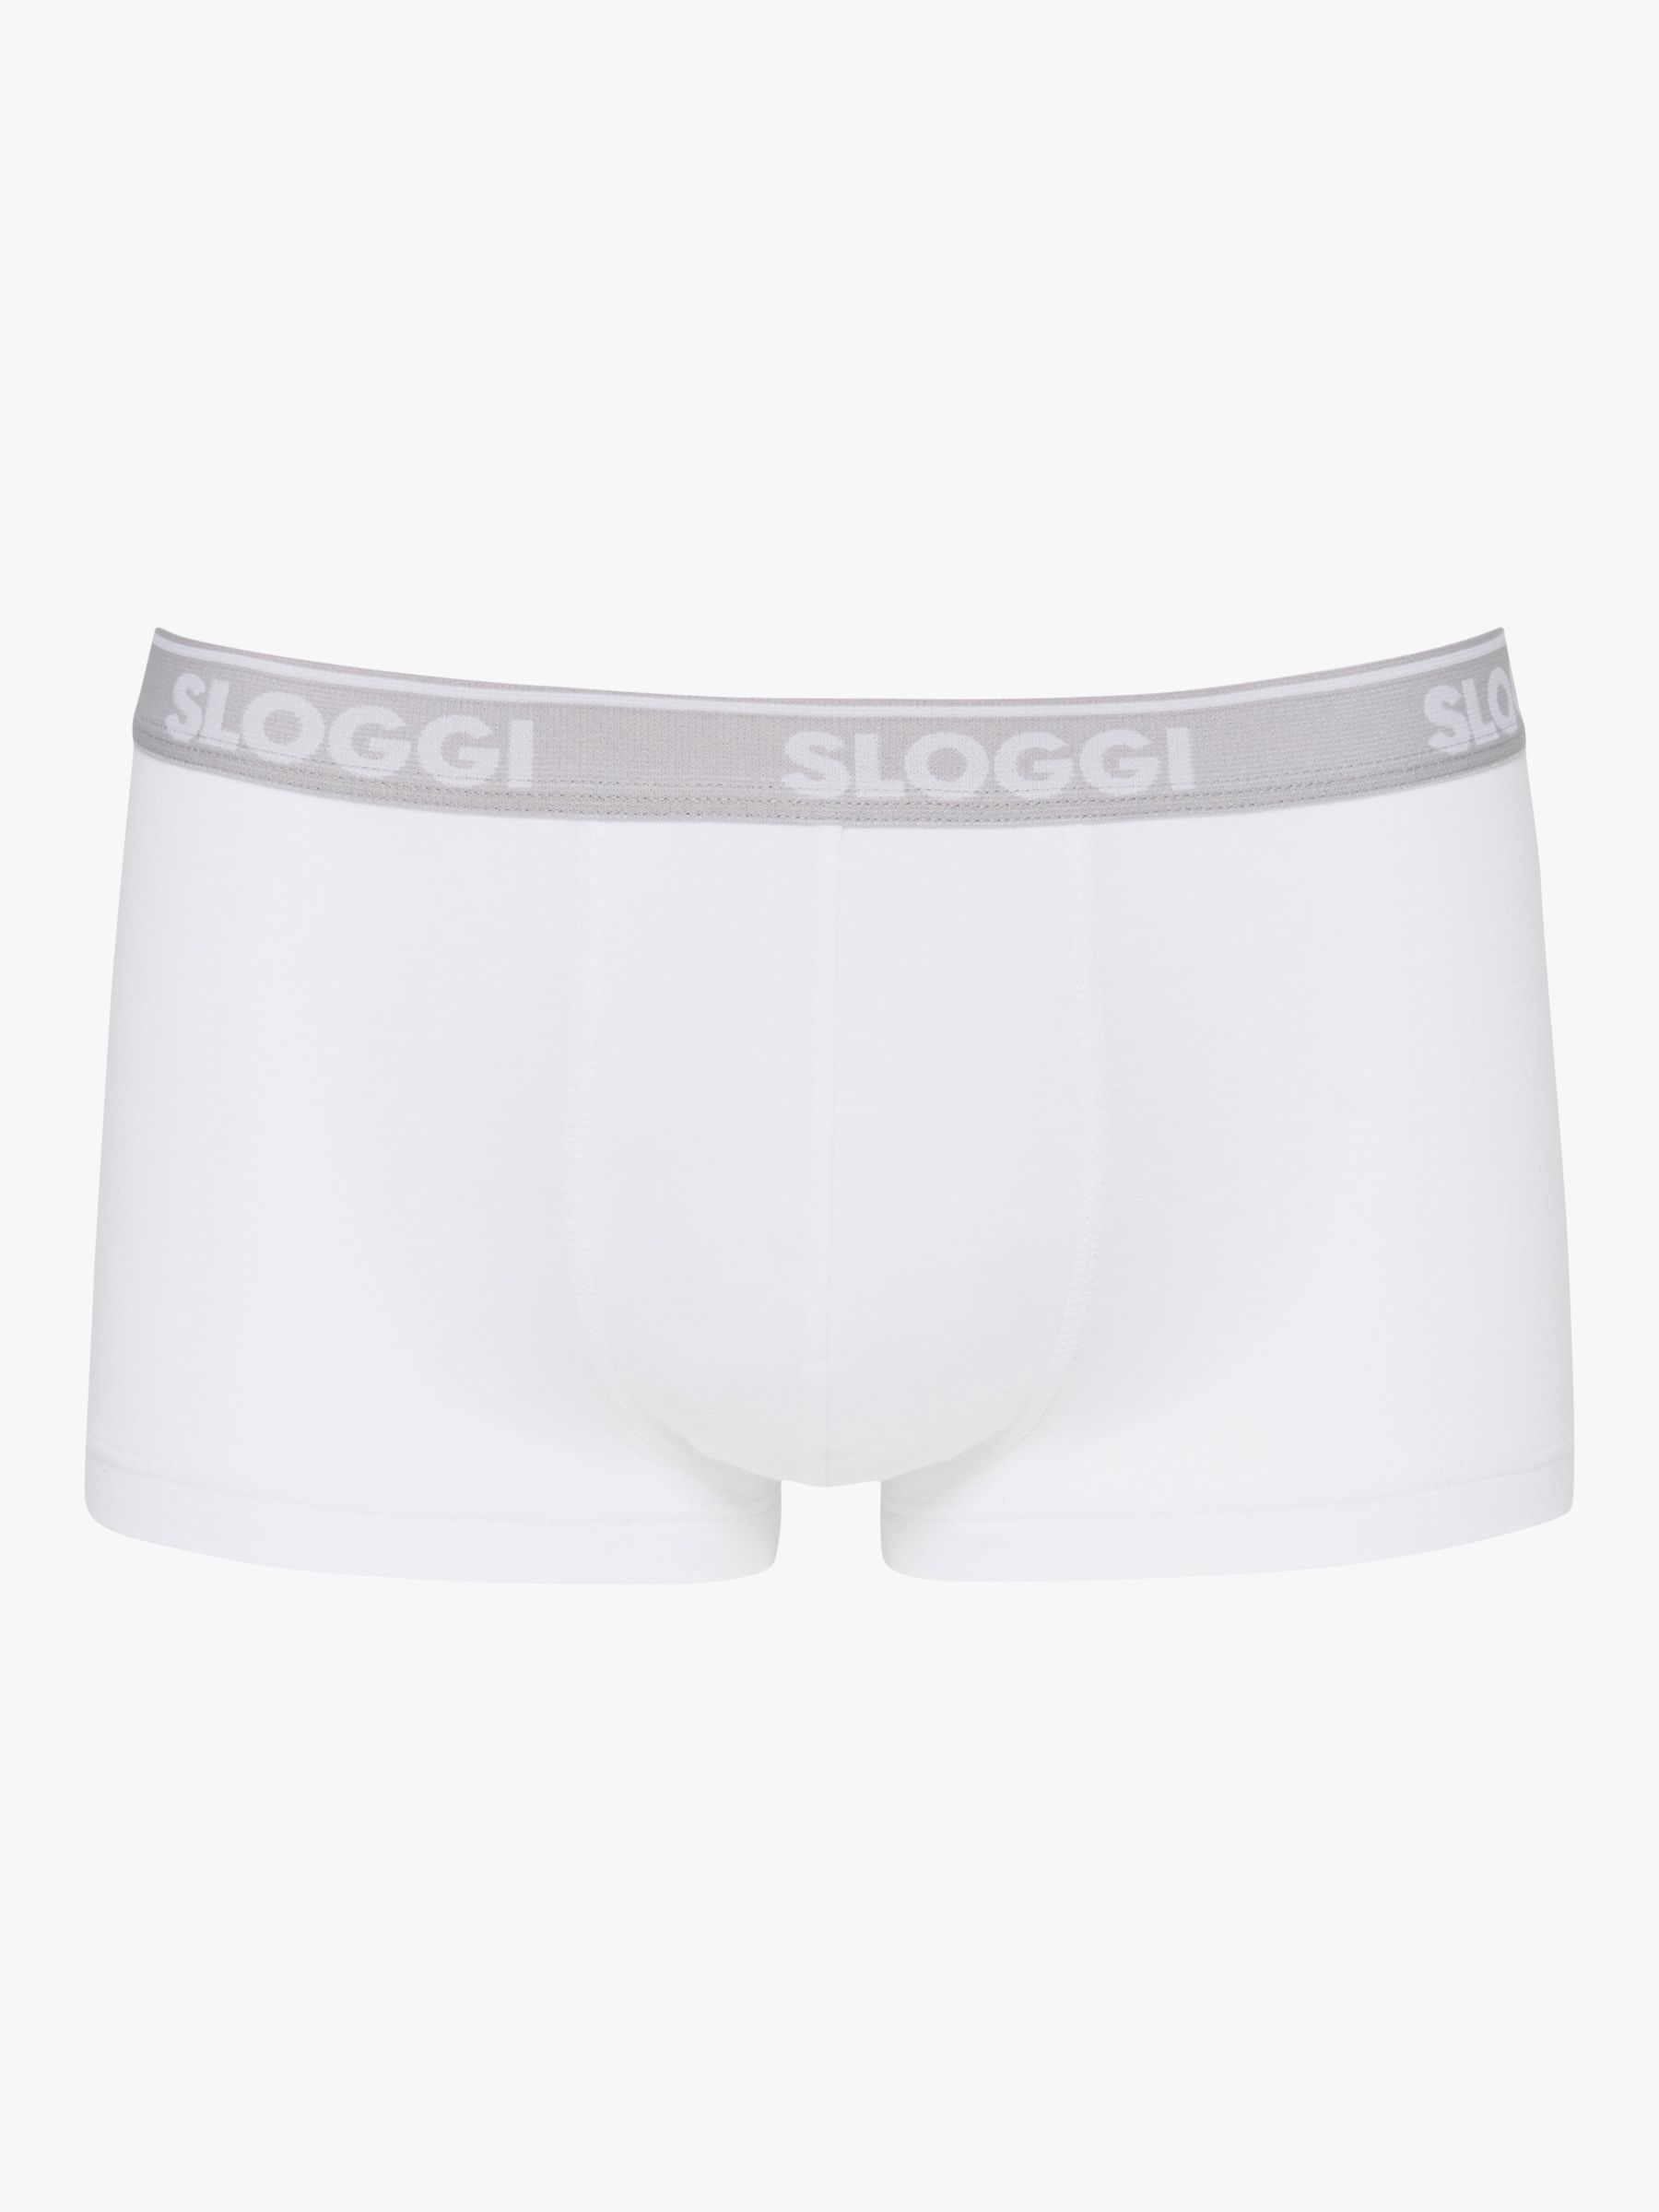 sloggi GO ABC Cotton Stretch Hipster Trunks, Pack of 6, White, L